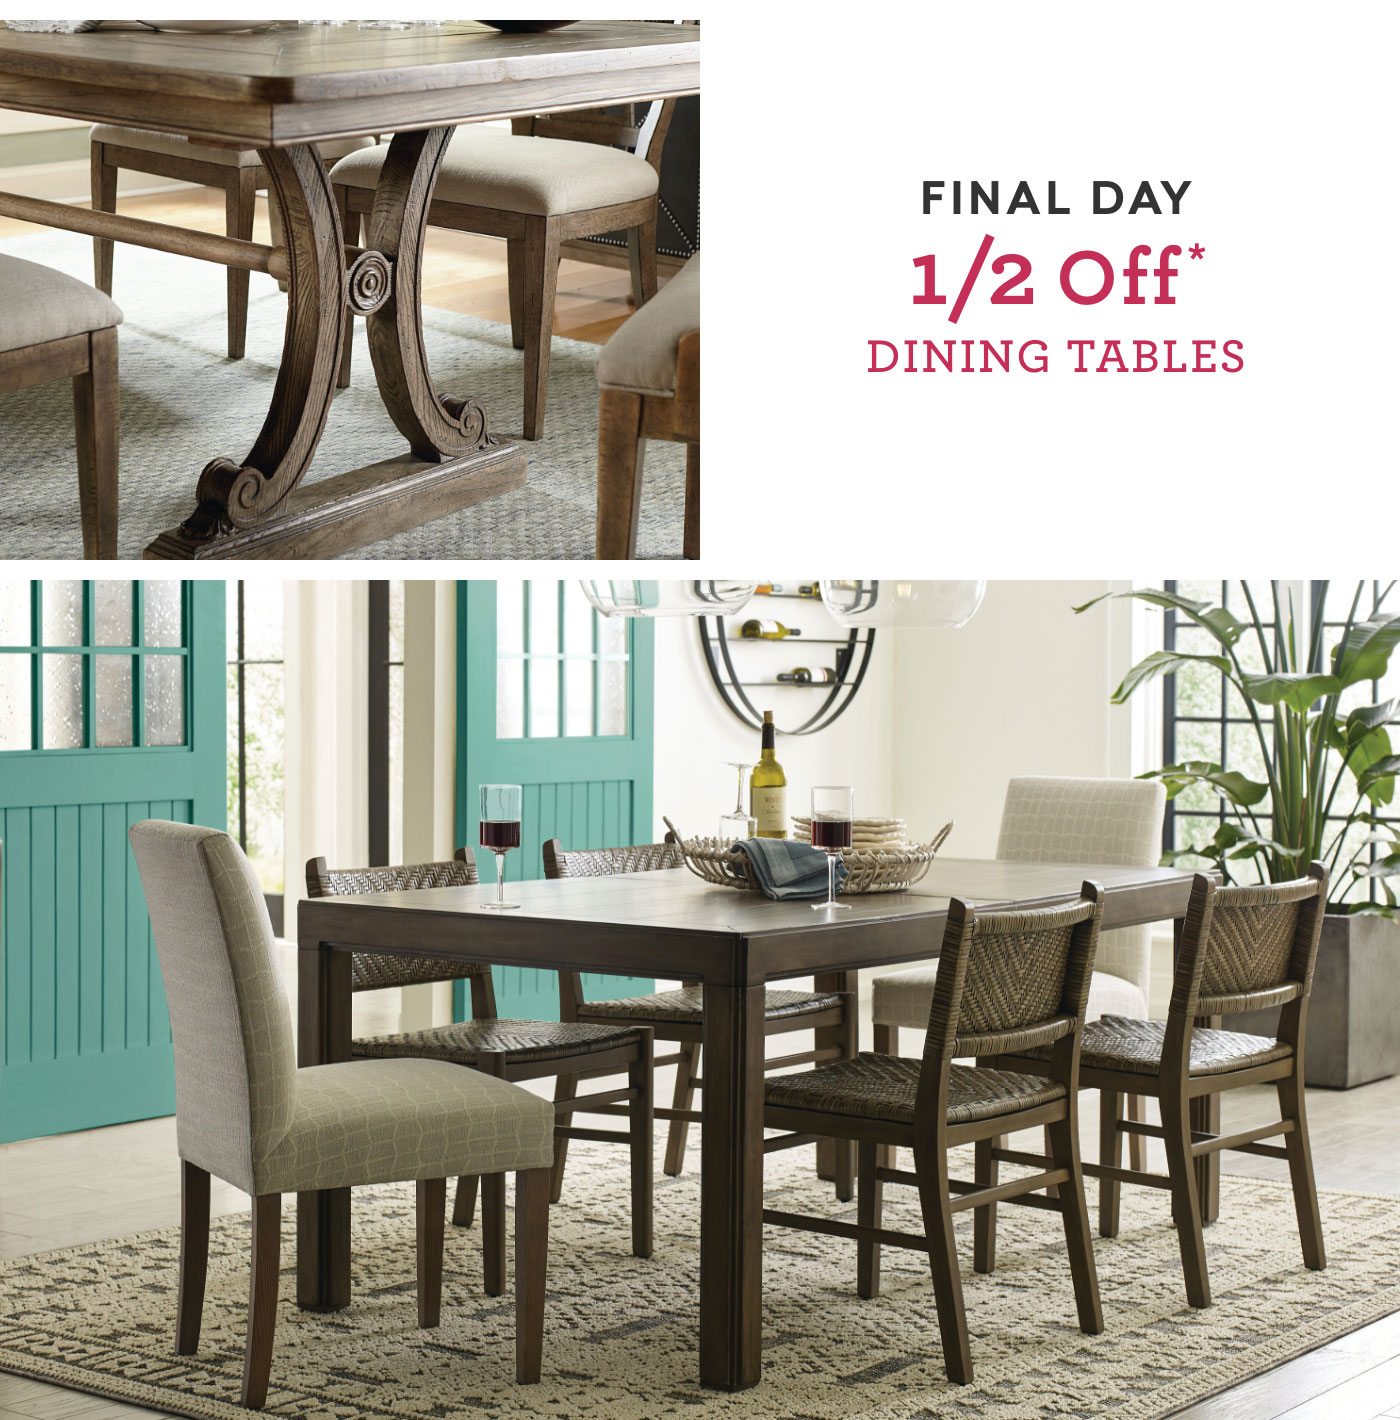 Final day, 1/2 off dining tables. Shop now.